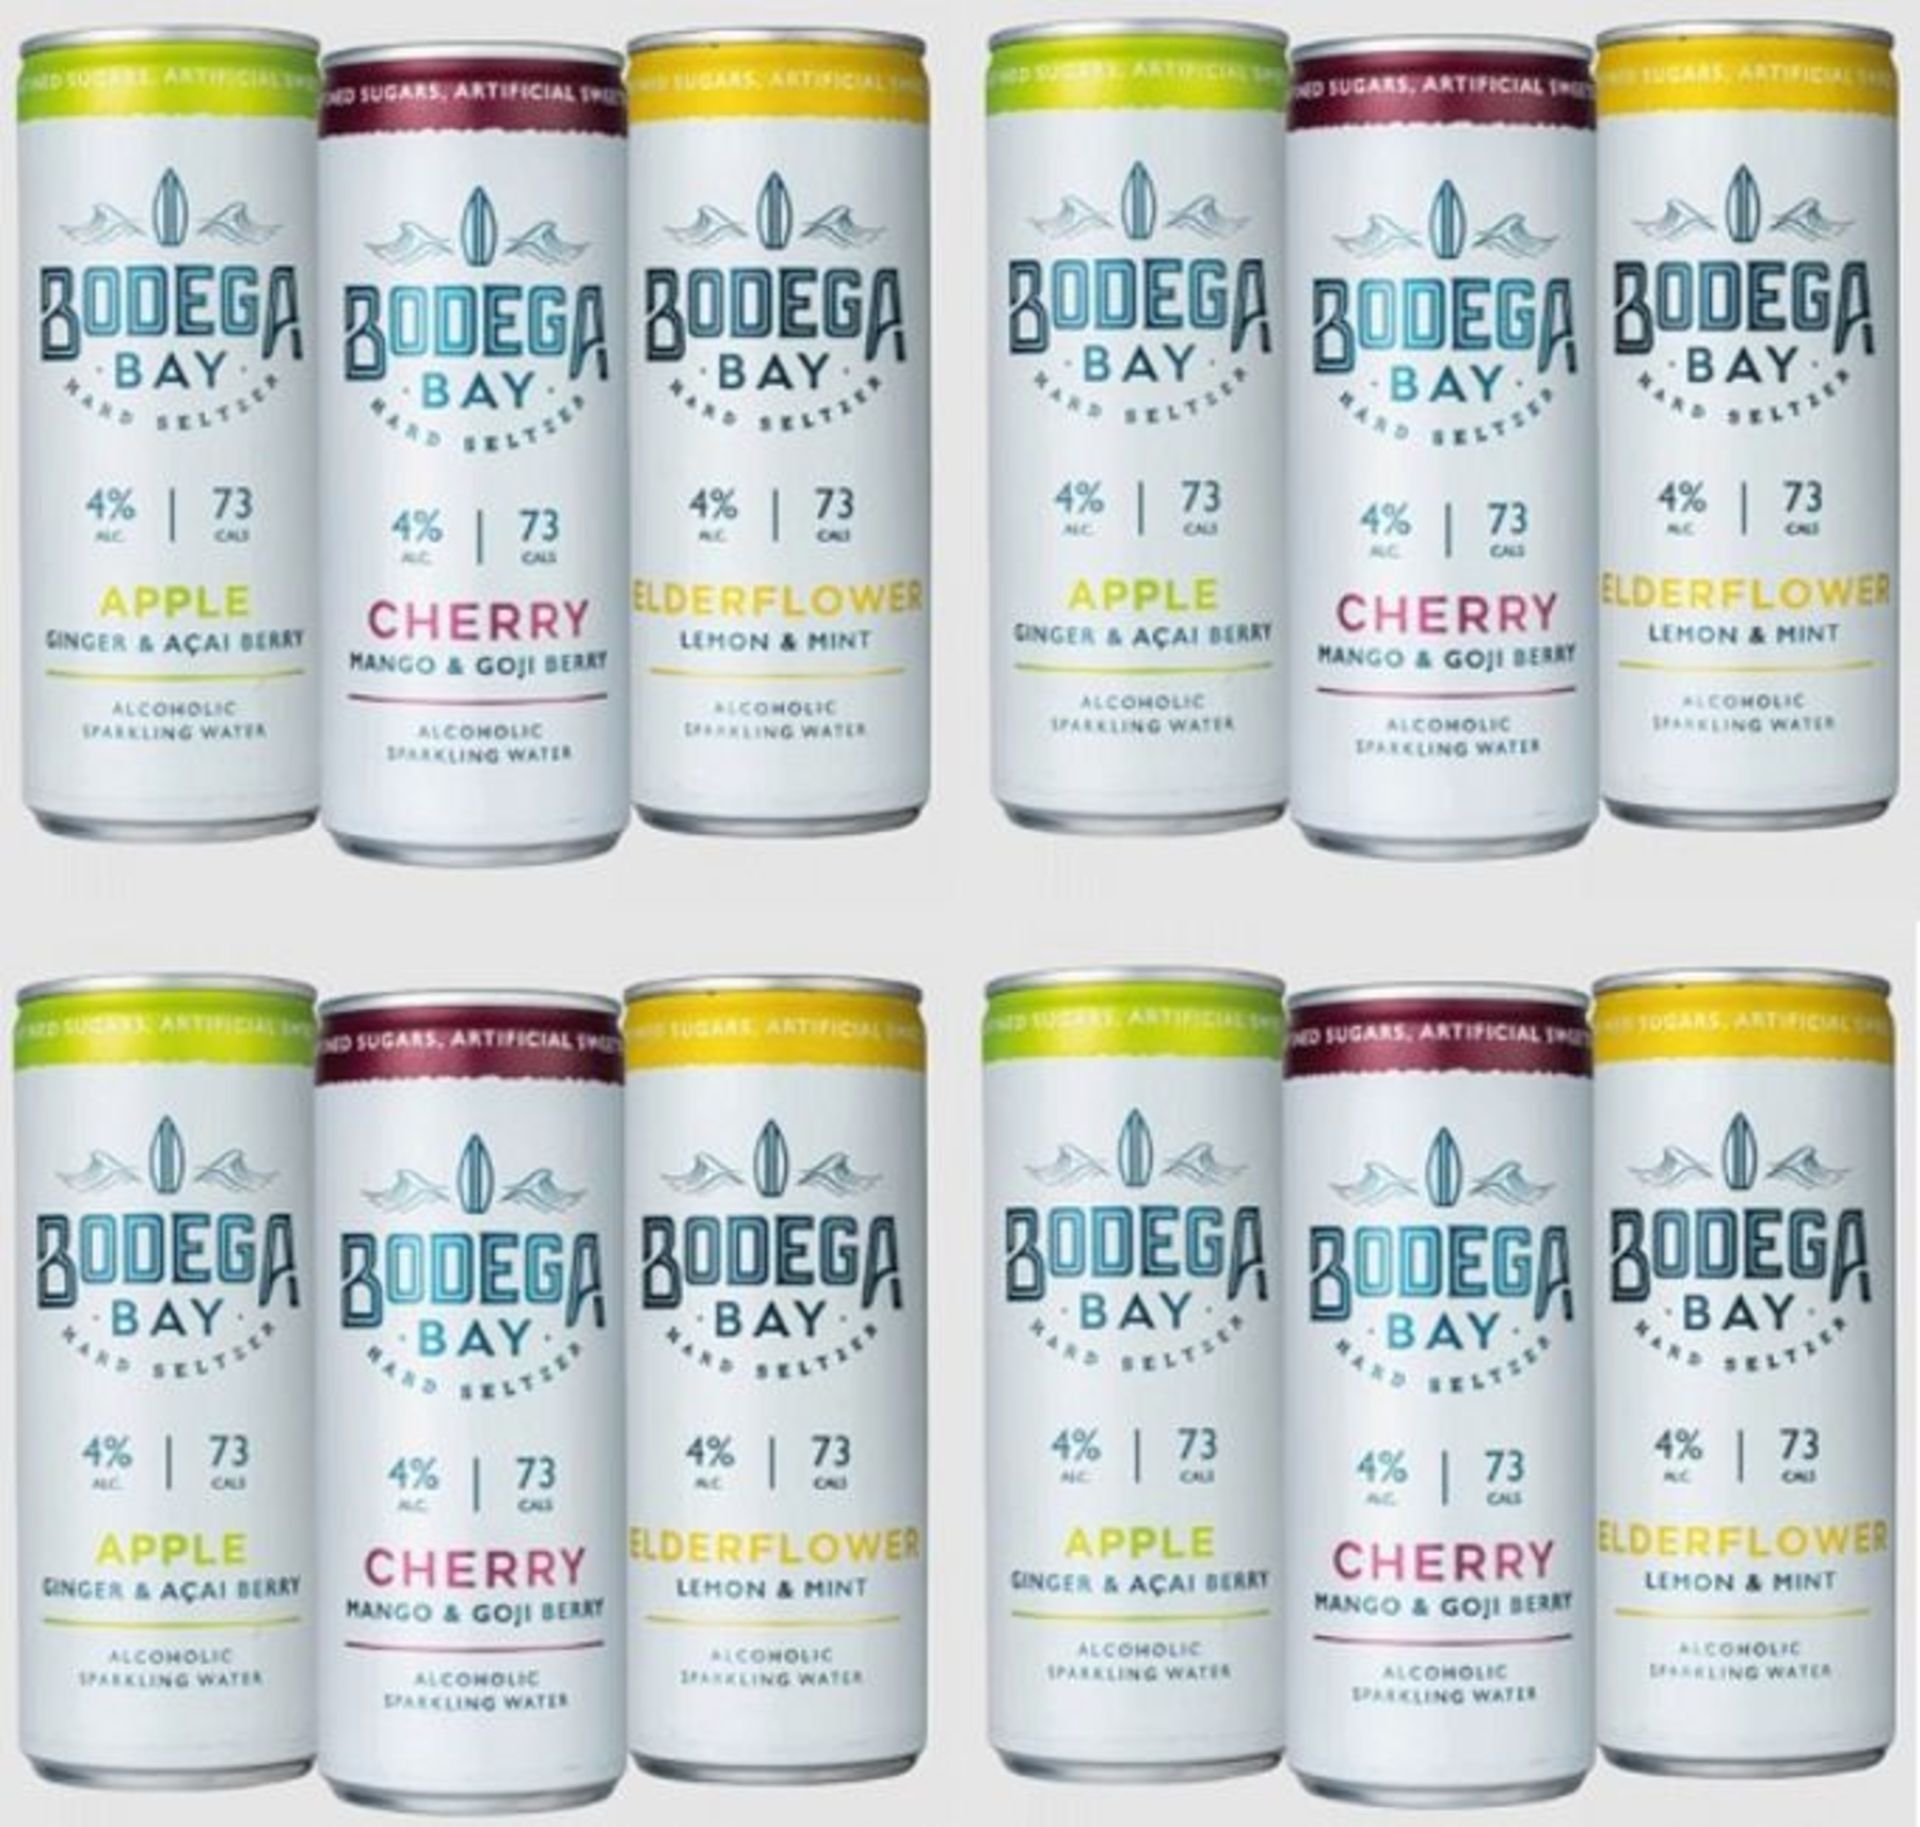 1,080 x Cans of Bodega Bay Hard Seltzer 250ml Alcoholic Sparkling Water Drinks - RESALE JOB LOT -